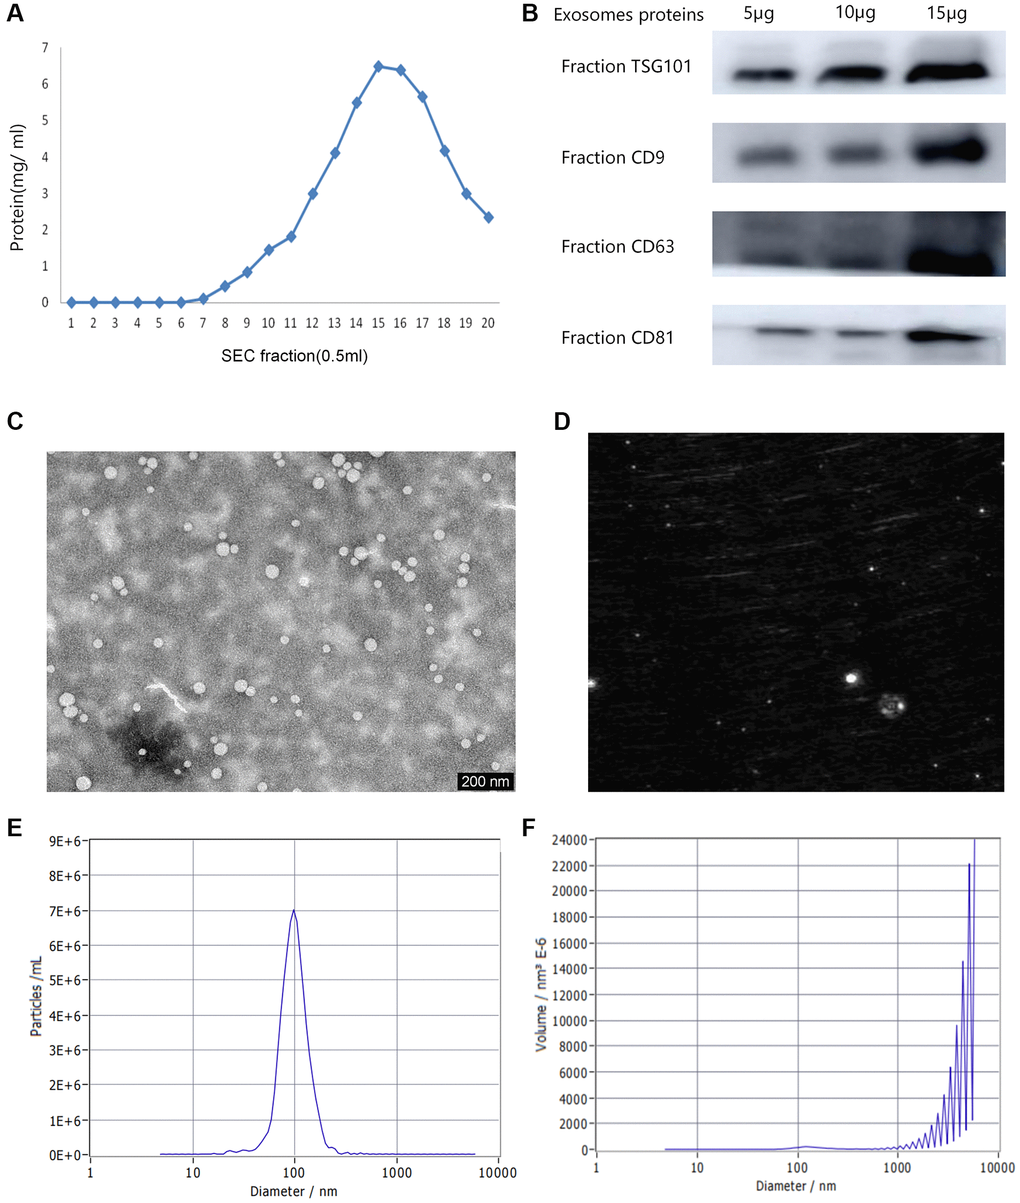 Various characterizations of plasma exosomes. (A) The content of plasma proteins in 0.5 mL fraction sample. (B) Western blot analysis of the typical exosomal proteins, TSG 101, CD9, CD63 and CD81. (C) Transmission electron microscopy (TEM) image indicating exosome morphology. (D) A representative laser scattering microscopy image of isolated exosomes. (E) The Nanoparticle tracking analysis (NTA) result of the particle size distribution for isolated exosomes. (F) The size distribution of volume consistent with the size range of exosomes.